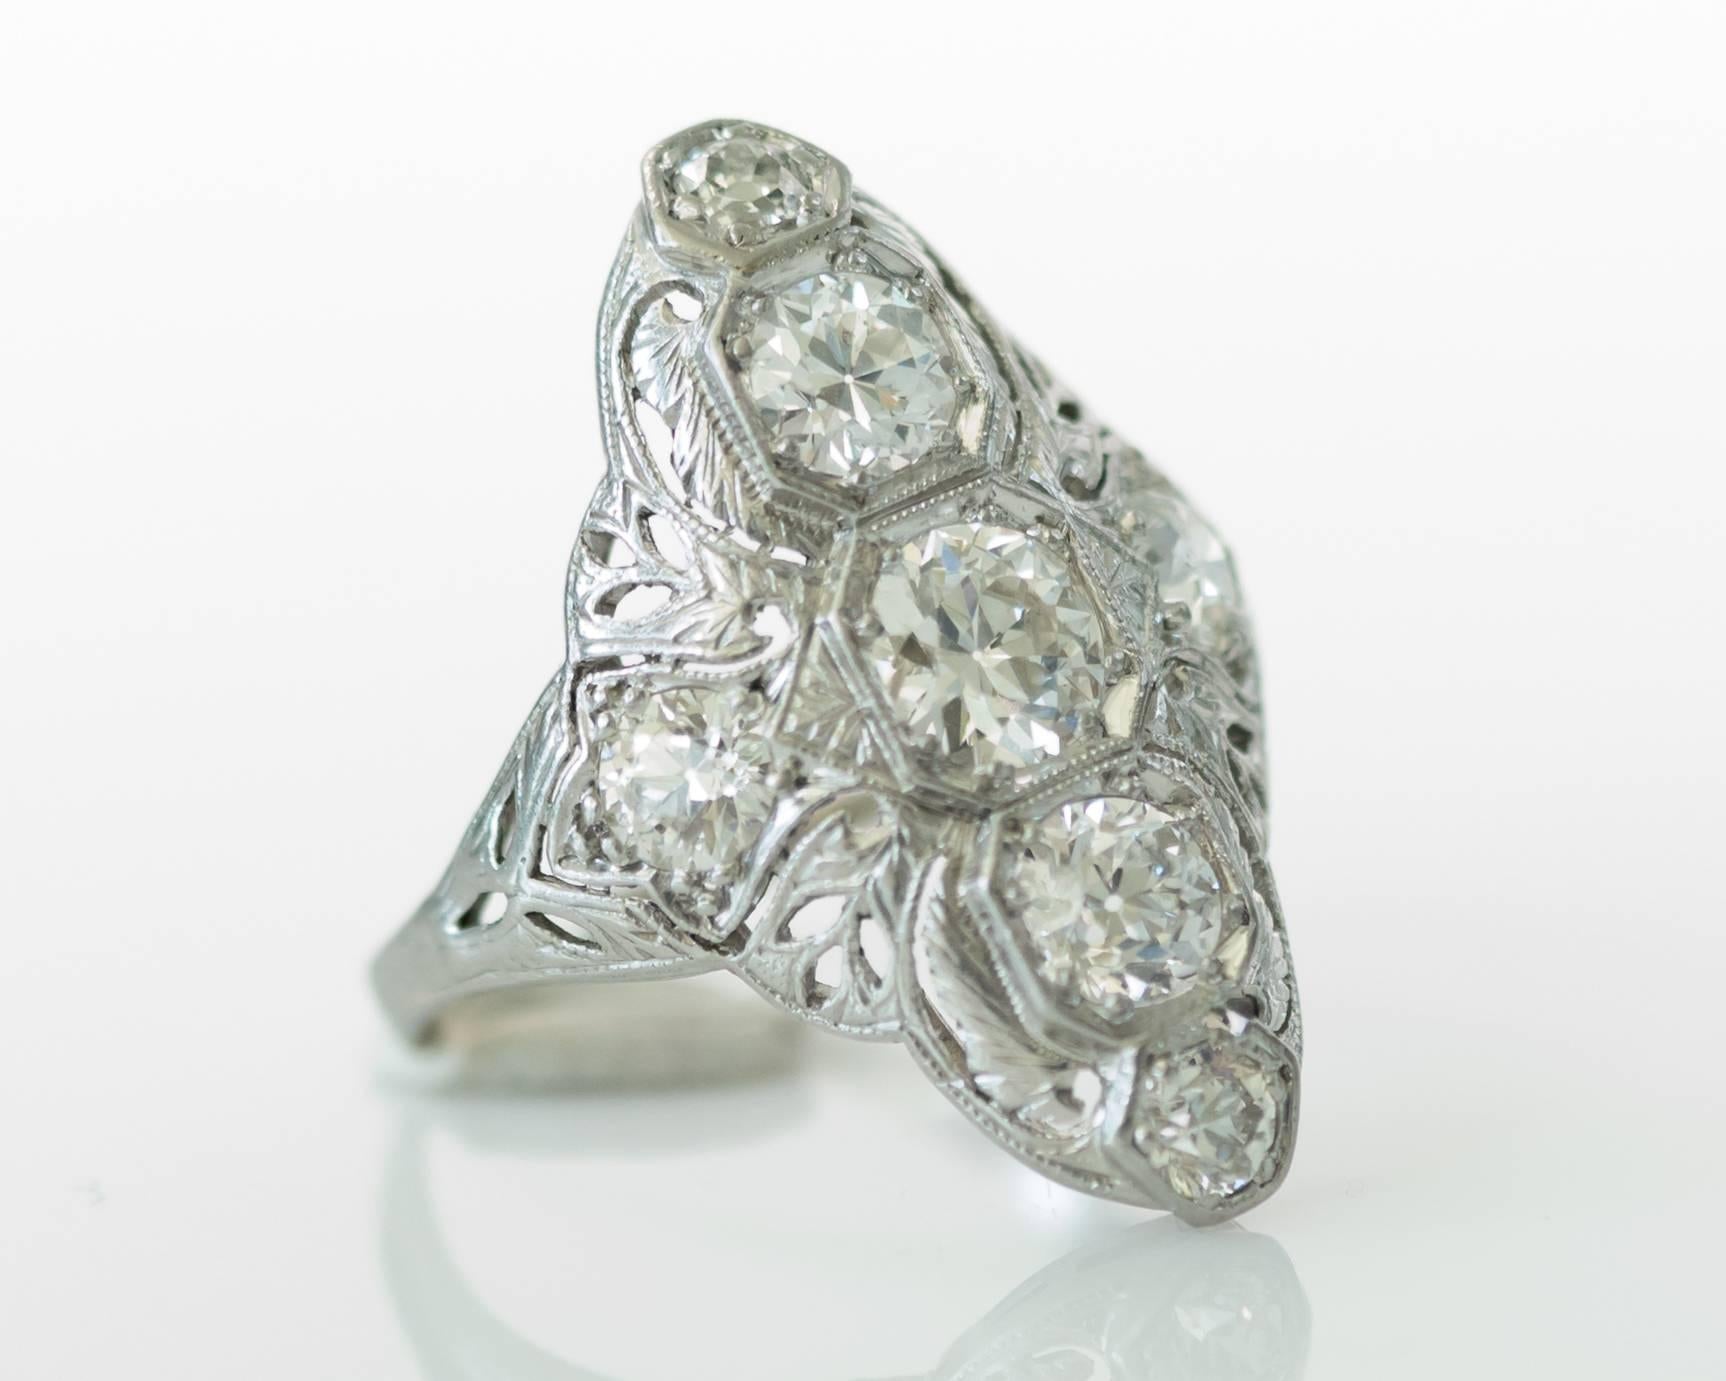 1930s Art Deco 2.06 Carat Diamond Platinum Shield Ring. Features Seven Diamonds and makes the perfect unique engagement ring! It is also a gorgeous cocktail ring! Wherever you wear it, this stunning seven diamond platinum ring is sure to turn heads.